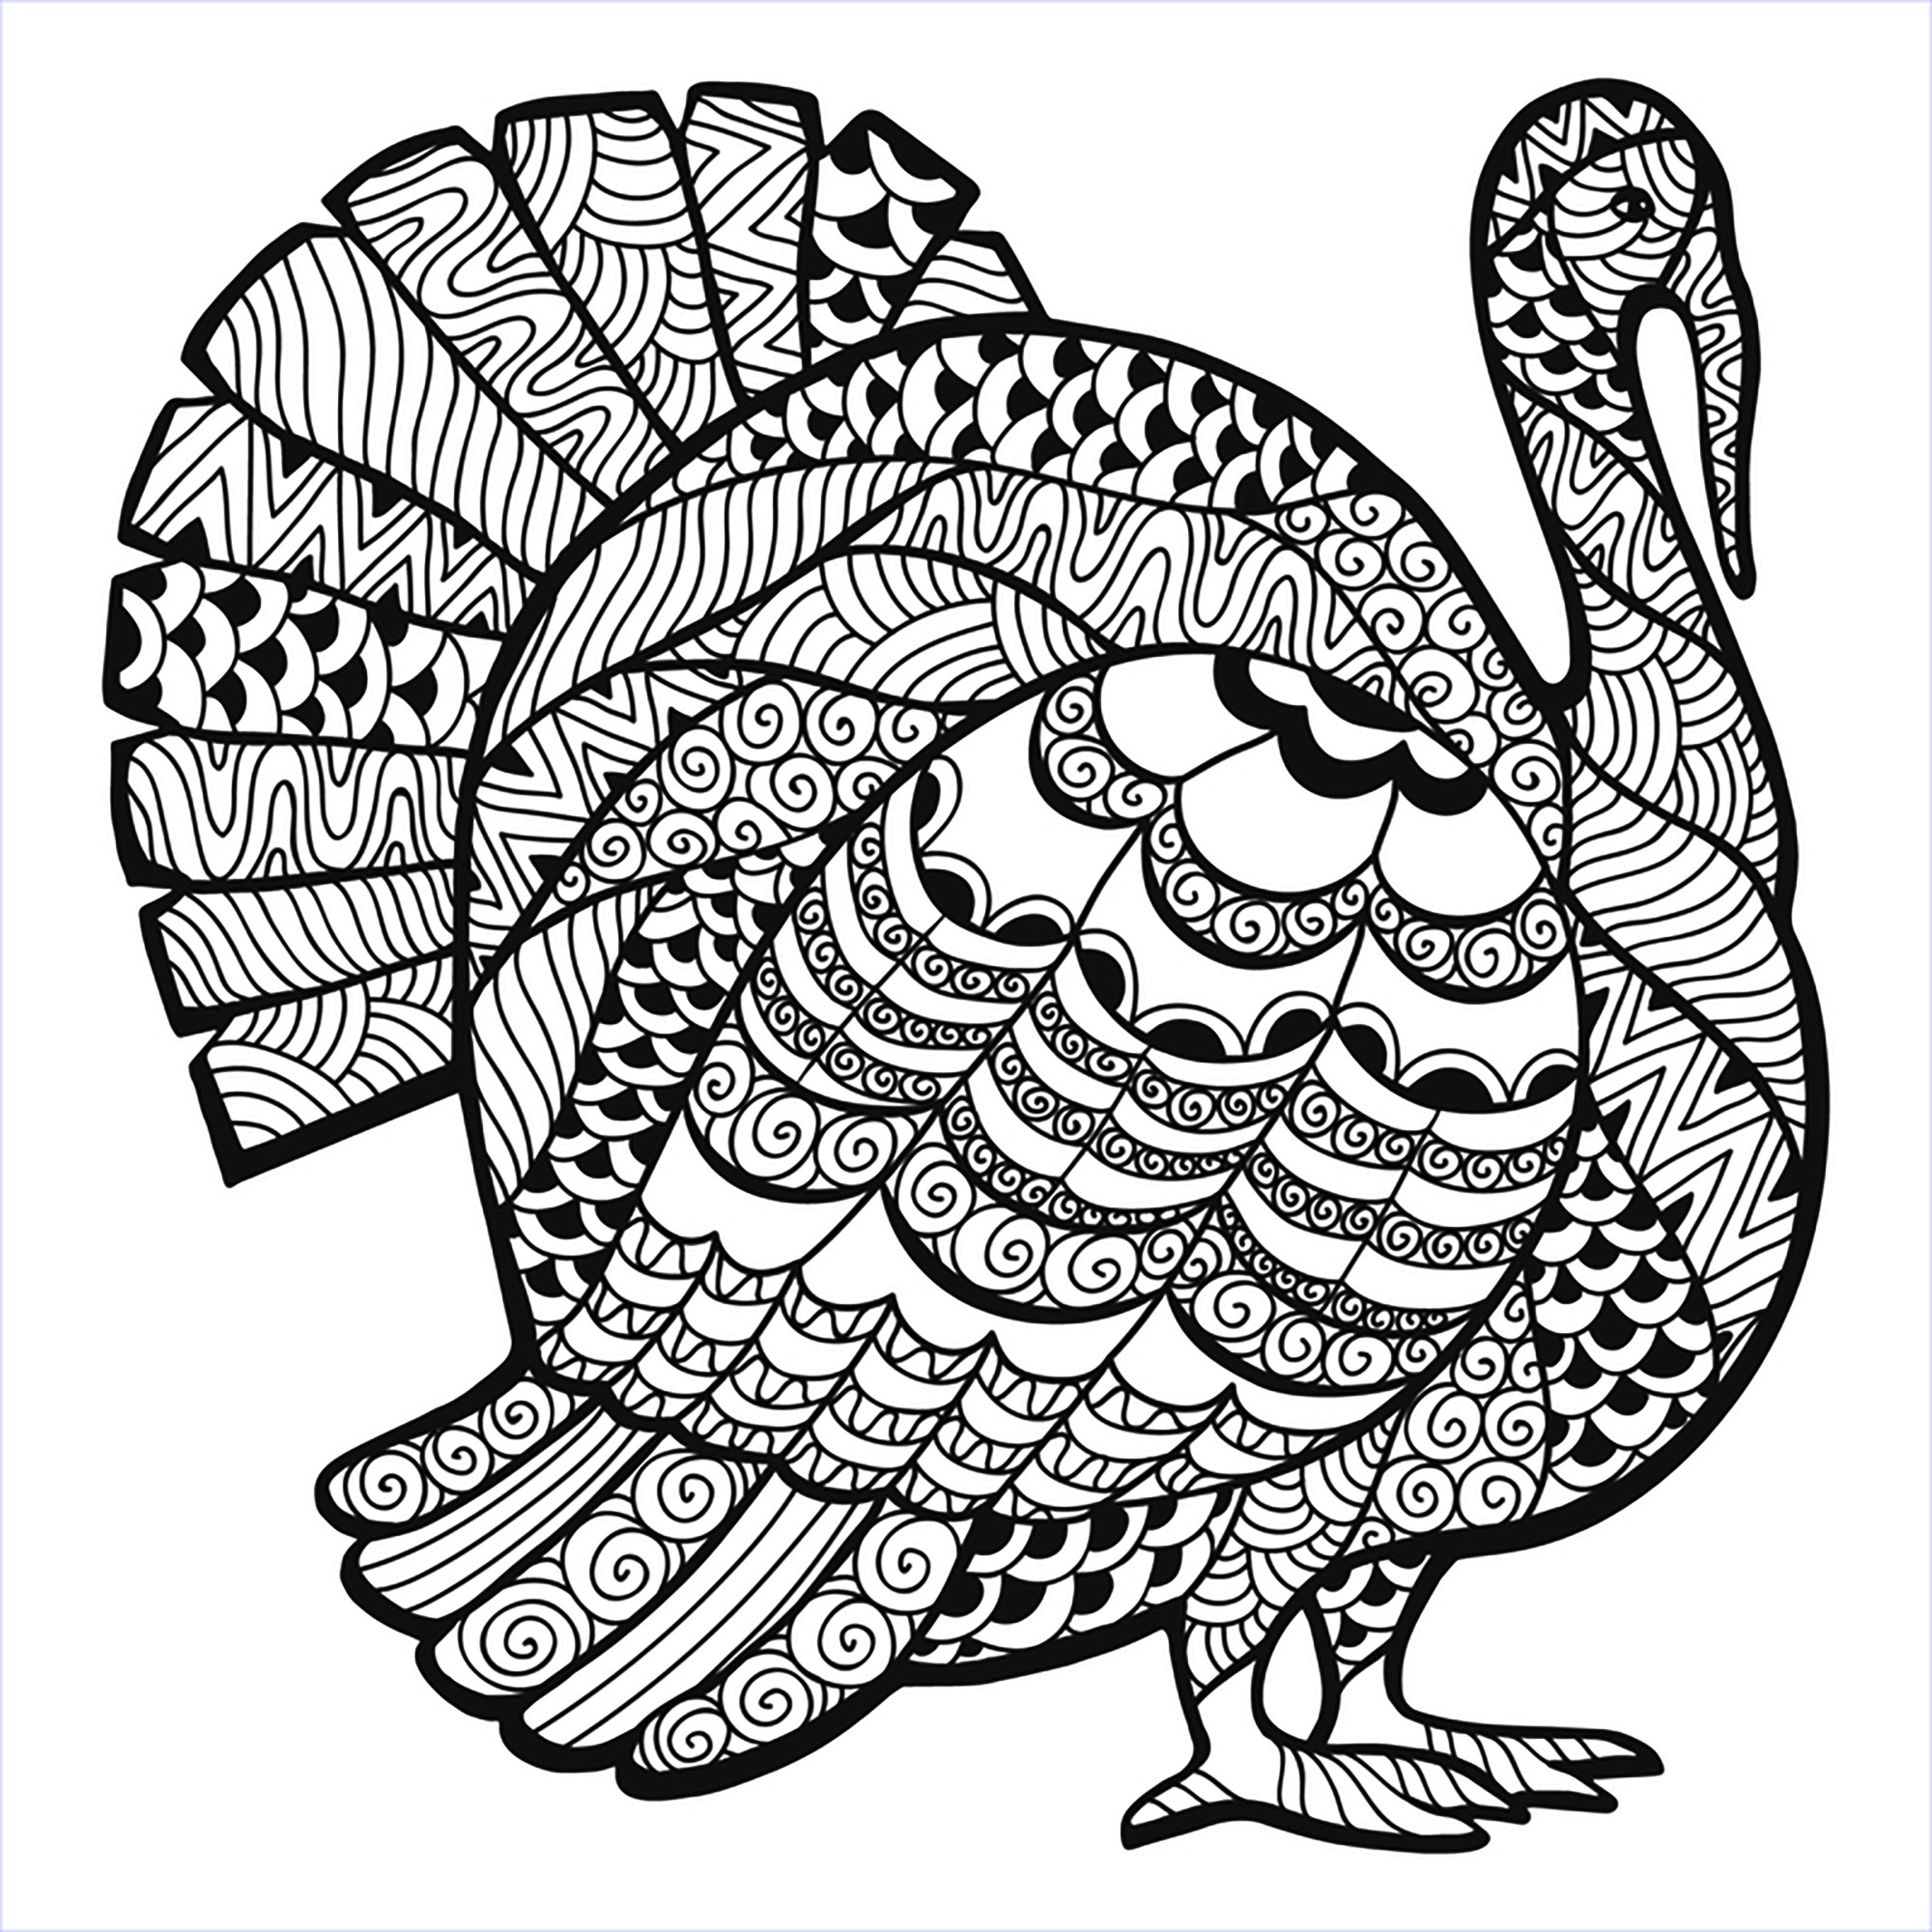 Turkey Zentangle Coloring Sheet - Thanksgiving Adult Coloring Pages - Free Printable Thanksgiving Coloring Pages